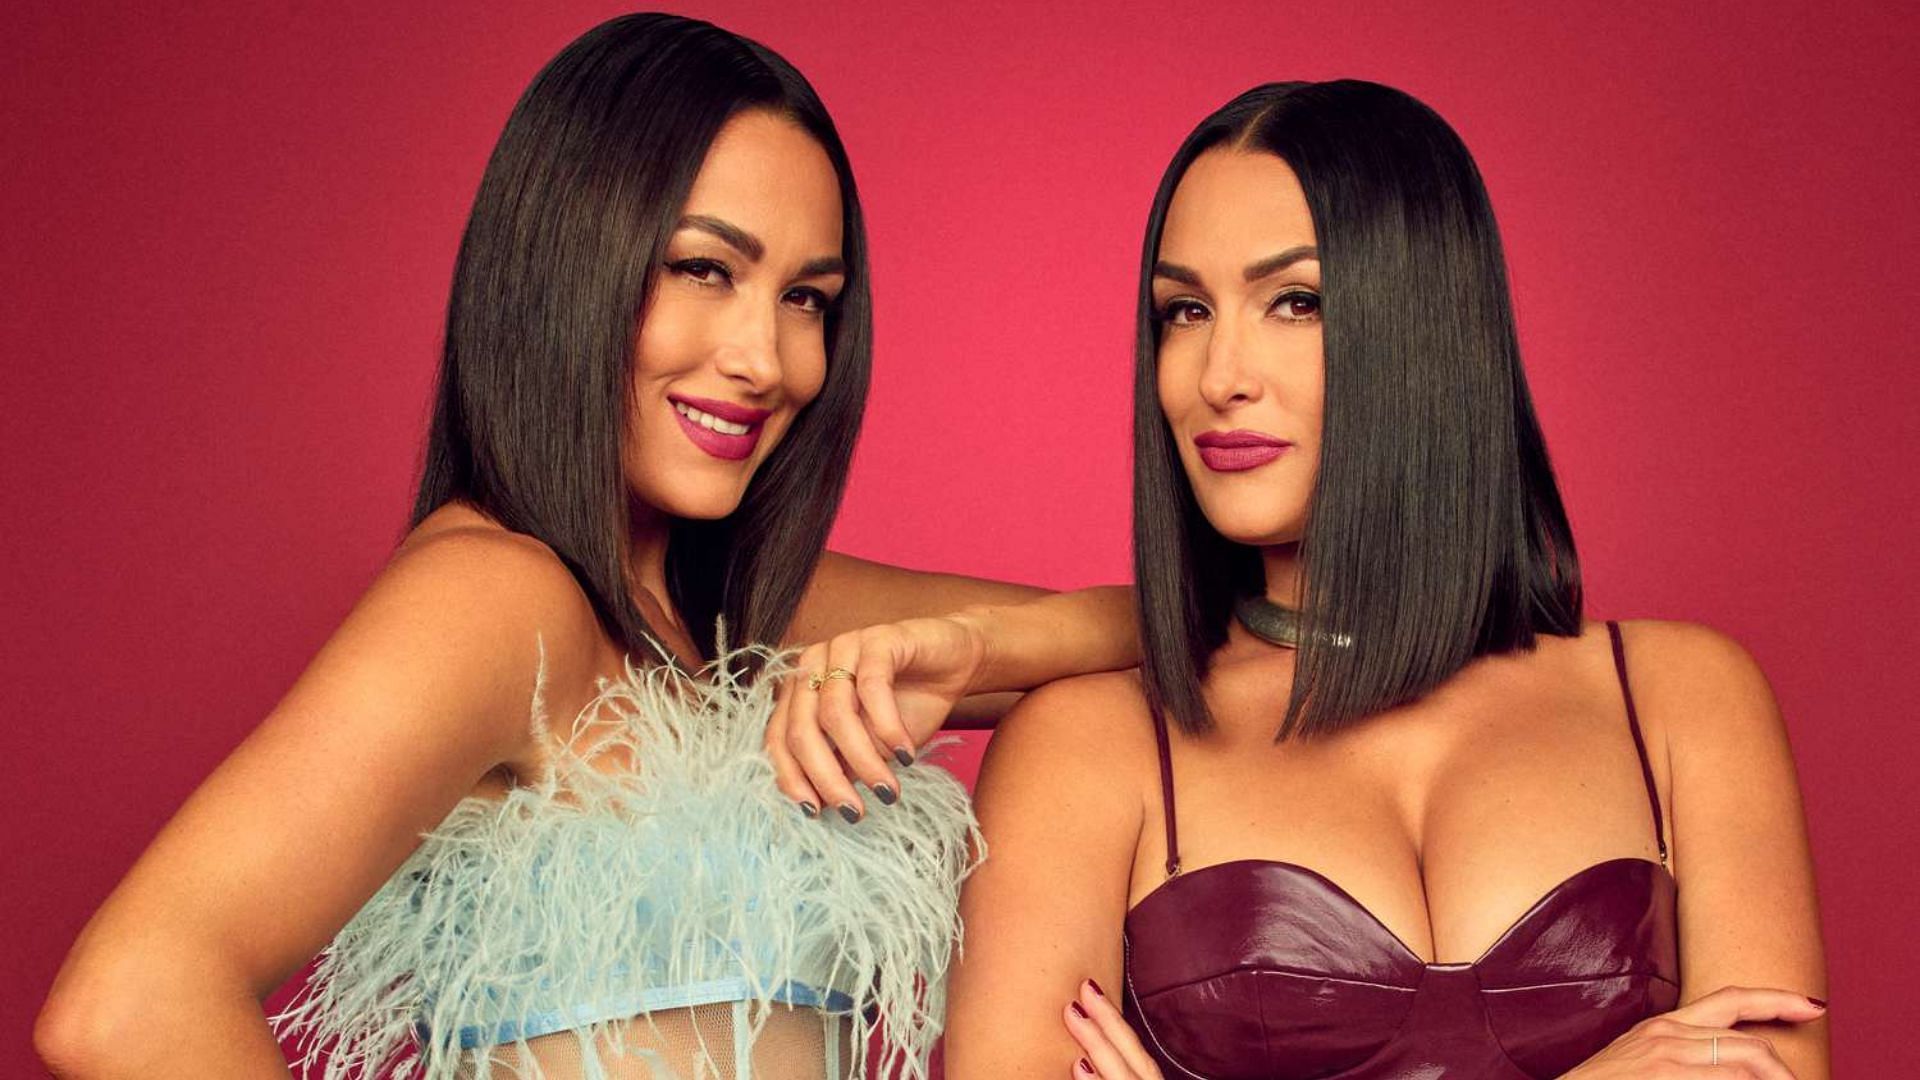 Nikki and Brie Bella are no longer on the roster.